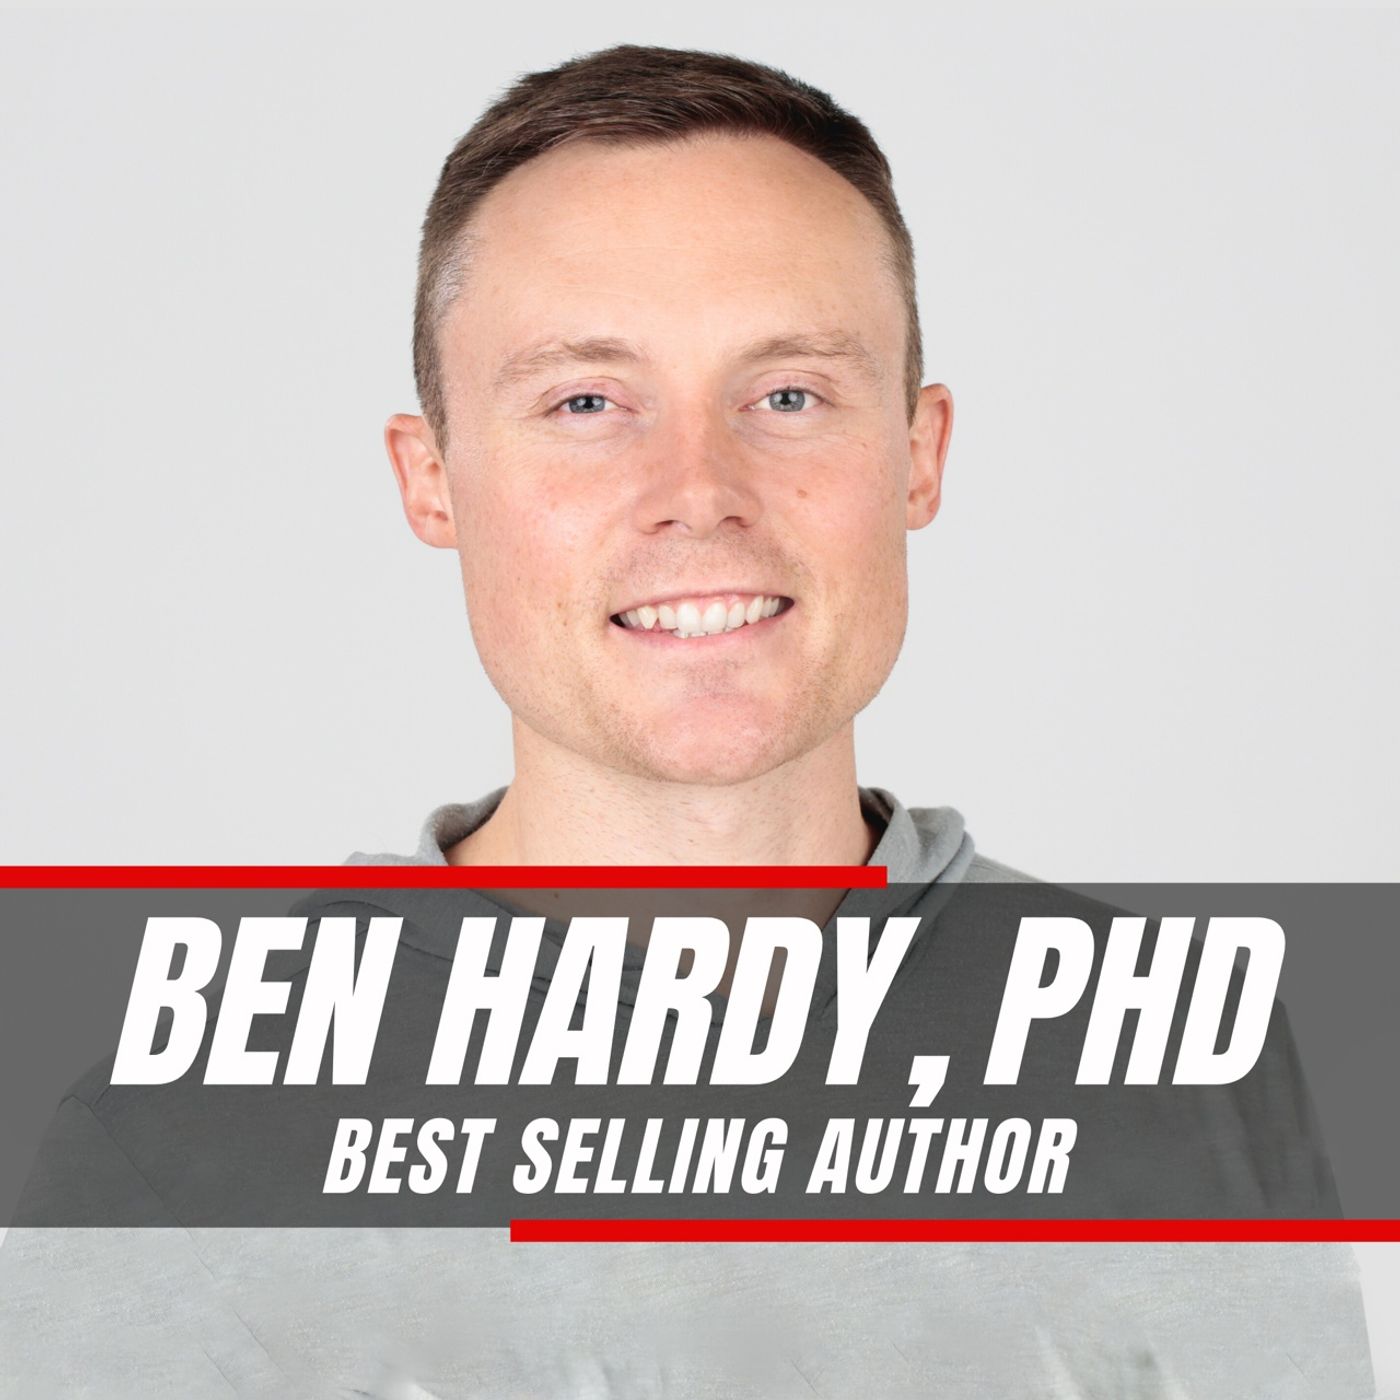 Personality Isn't Permanent | Ben Hardy - Best Selling Author